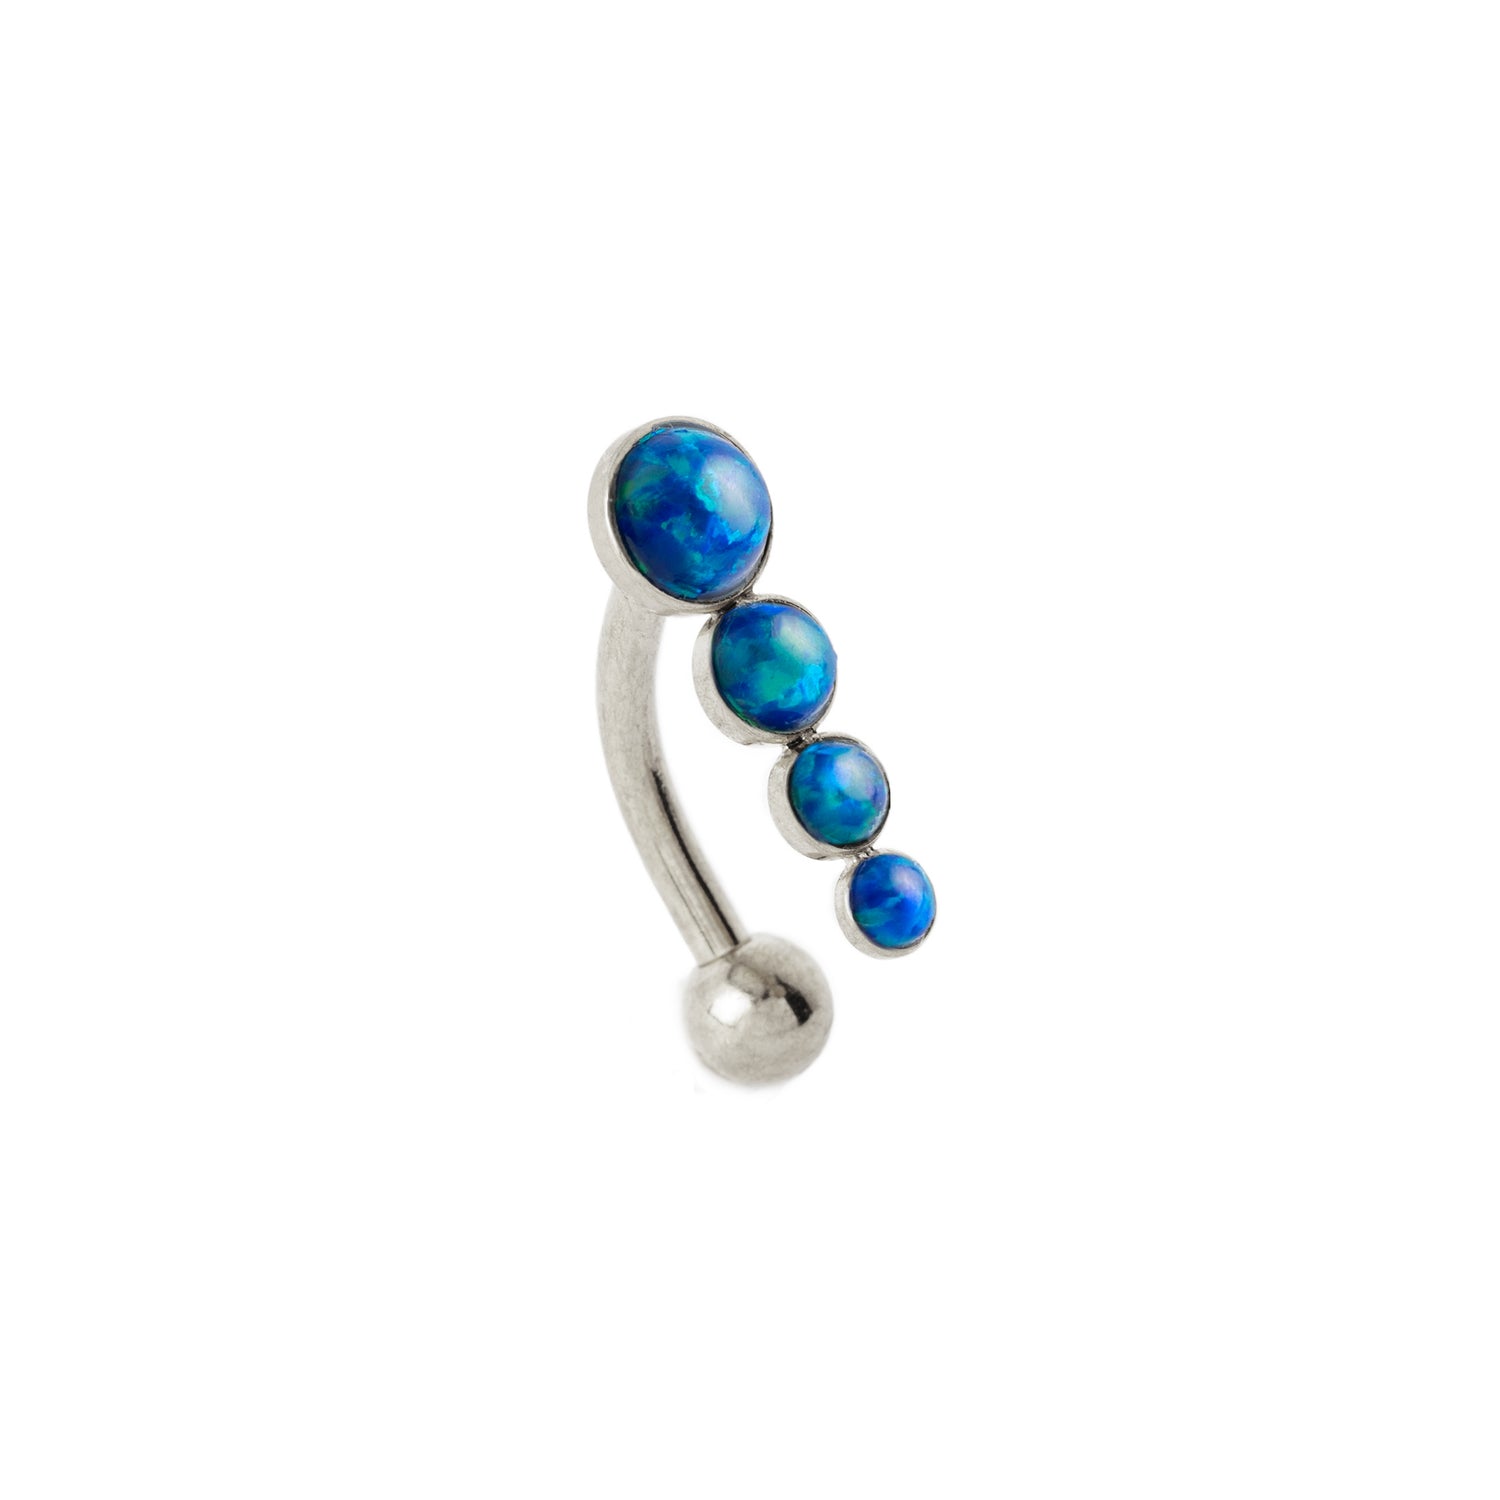 Newton Navel Piercing with Blue Opal left side view